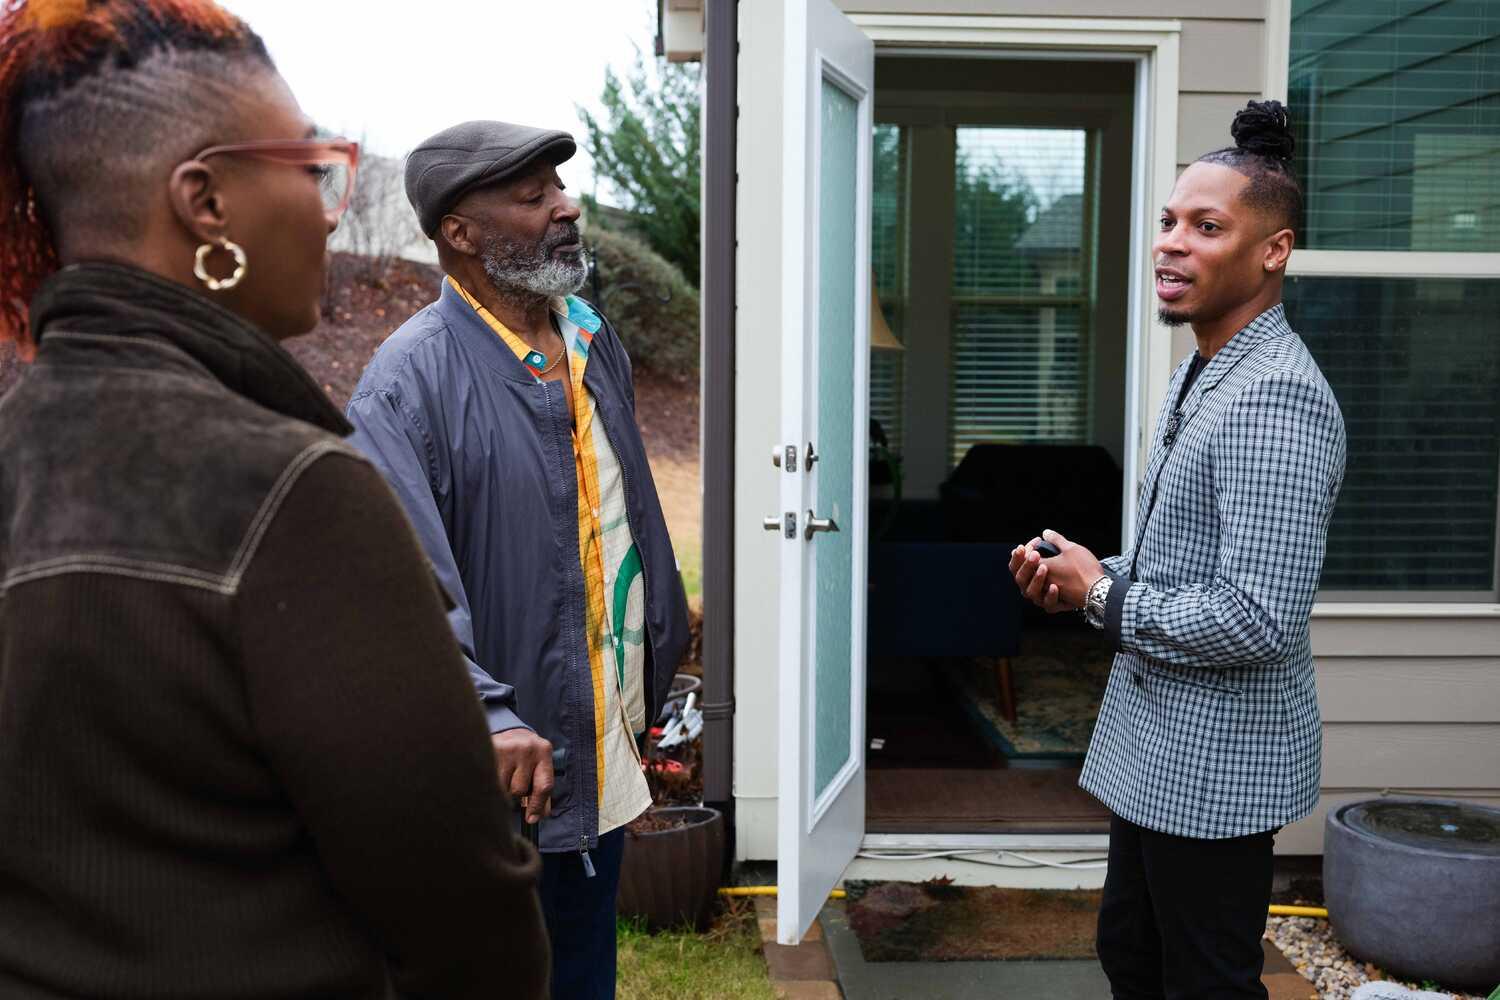 A man wearing a checkered jacket and dark-colored pants stands outside a house and talks to a man and woman. The other man is wearing a leather flat cap, a colorful button-down shirt and a blue jacket. He has a gray beard. The woman has a partially shaved head and reddish-orange locks.